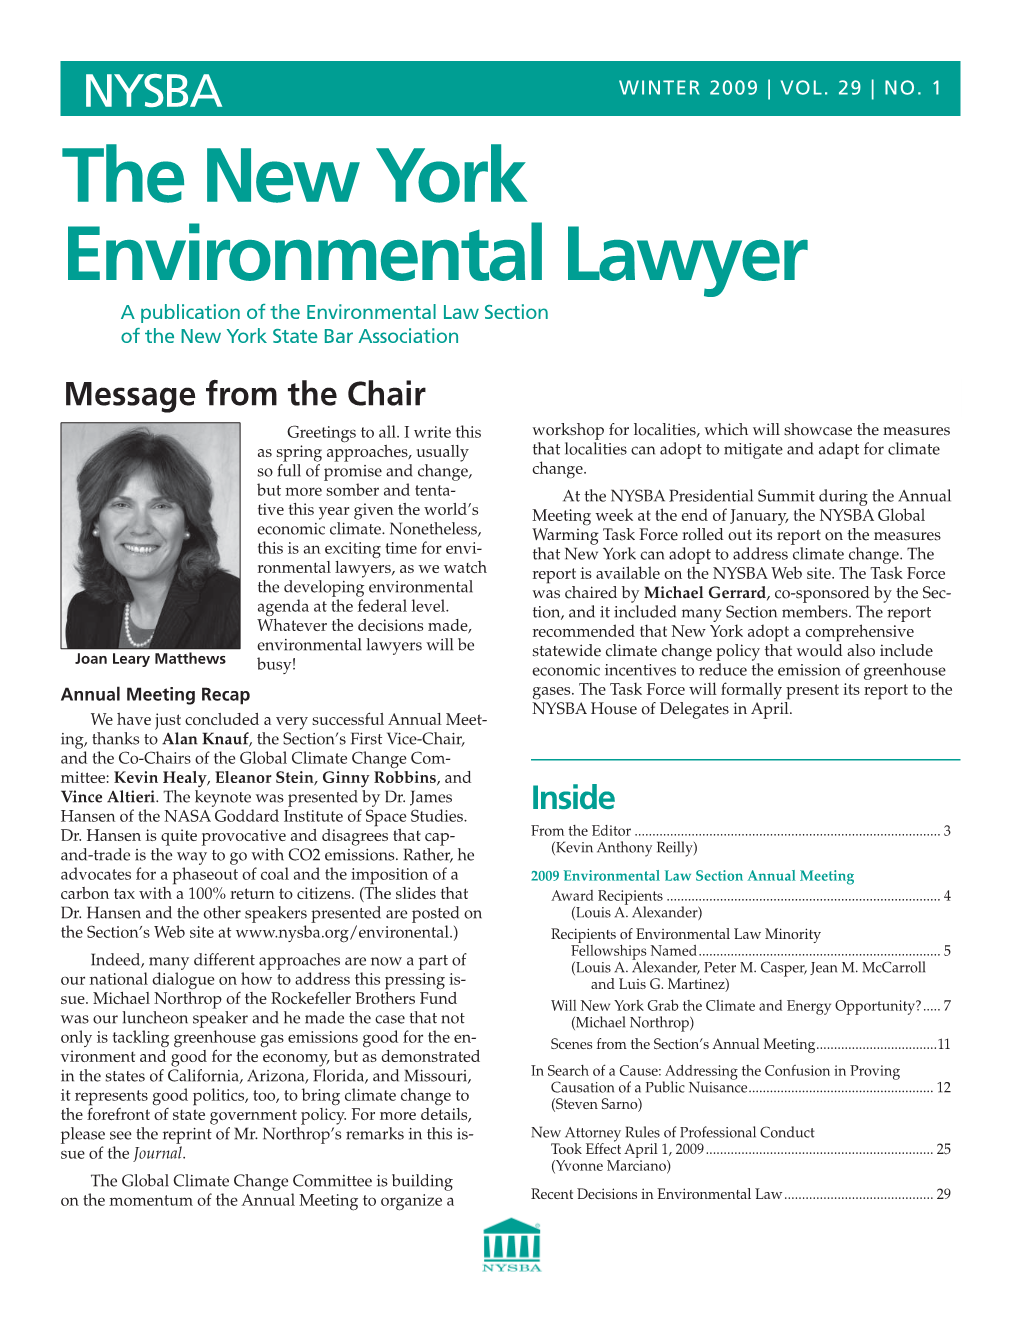 The New York Environmental Lawyer a Publication of the Environmental Law Section of the New York State Bar Association Message from the Chair Greetings to All